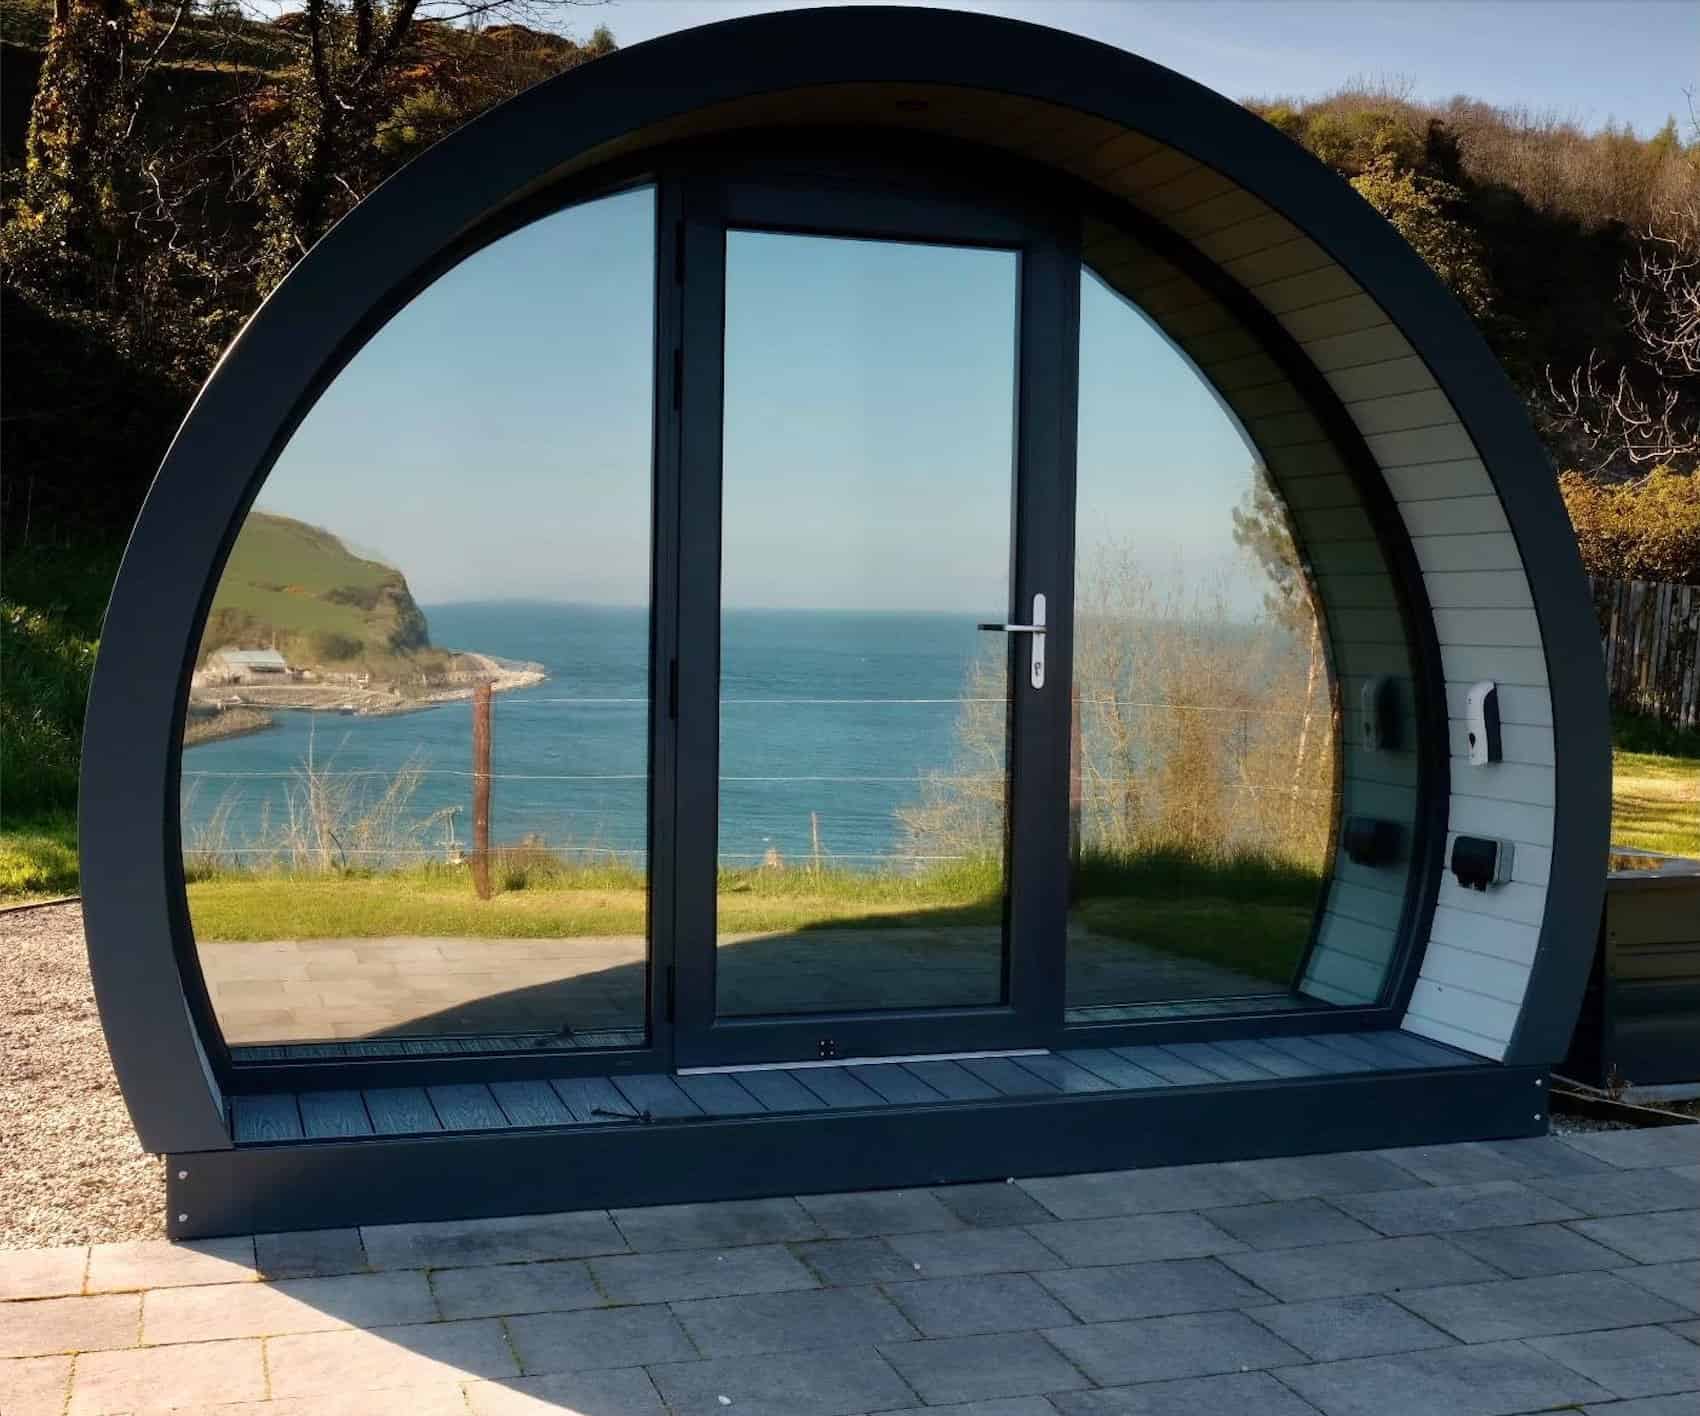 “The pod was spotlessly clean, surprisingly spacious and the beds were extremely comfortable”